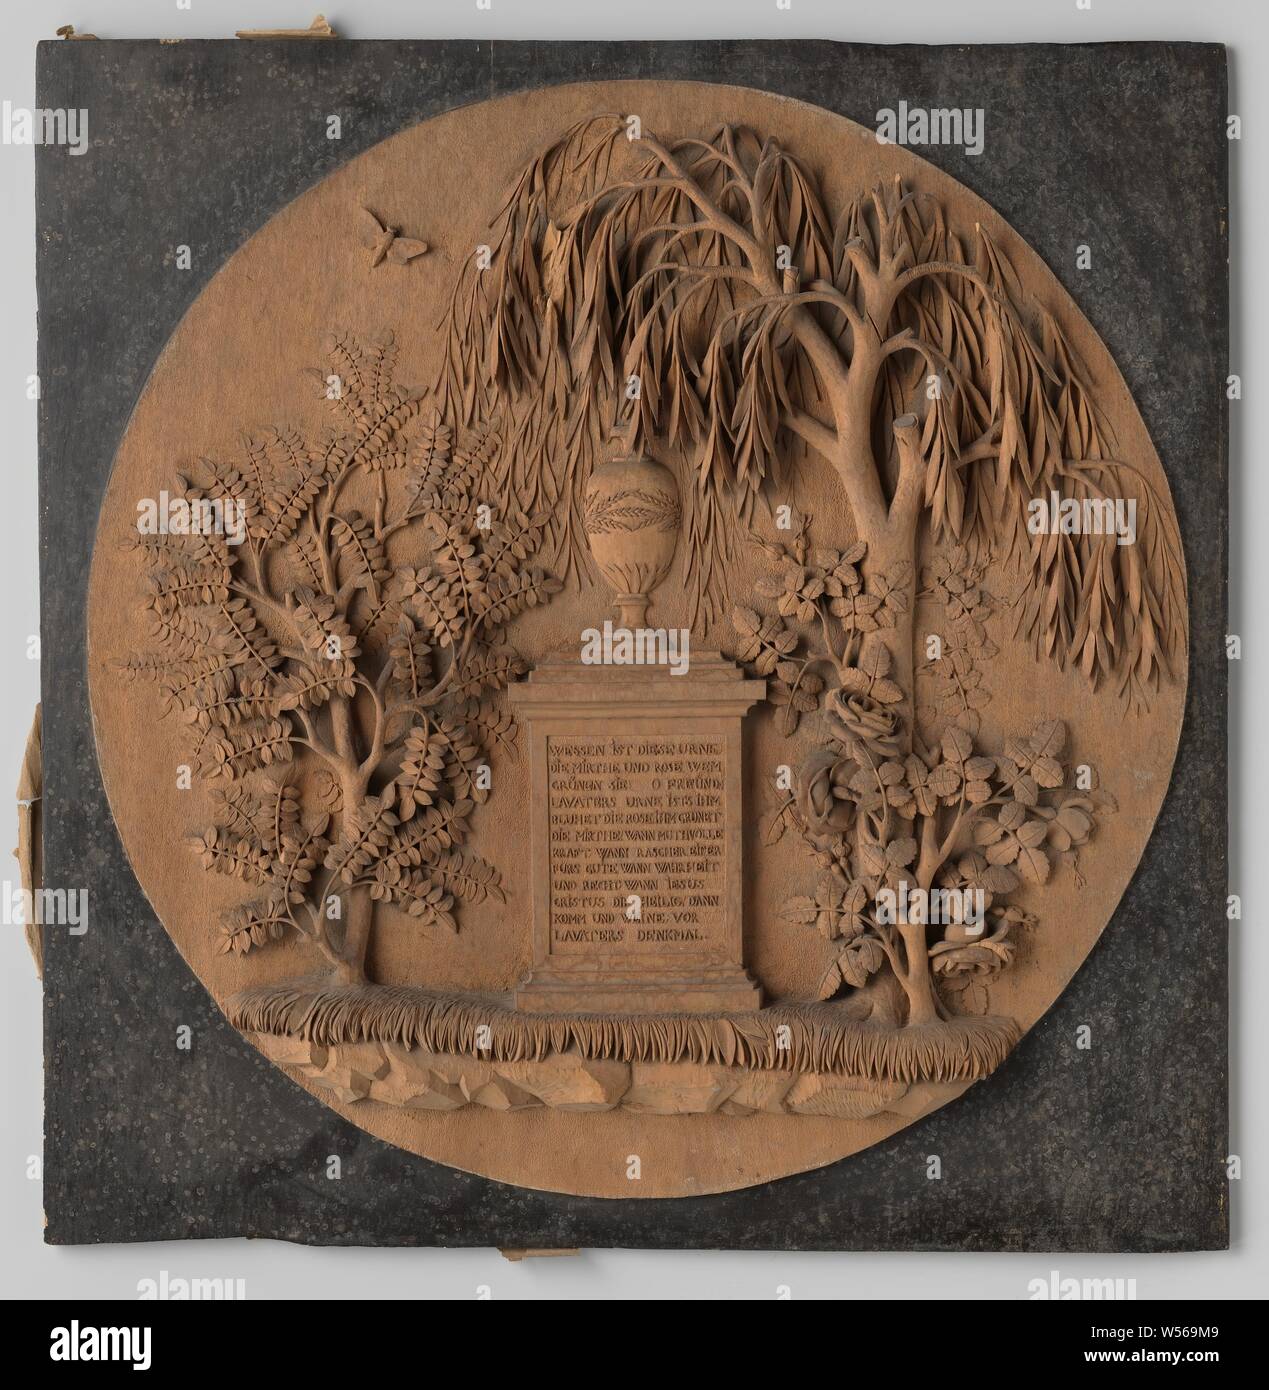 Symbolic representations on Johann Kaspar Lavater's dying, Sensory representations on Johann Kaspar Lavater's dying, with German writing. Bas relief carved in wood. In a frame behind glass., anonymous, in or after 1801, wood (plant material), h 78.0 cm × w 78.0 cm × d 5 cm Stock Photo